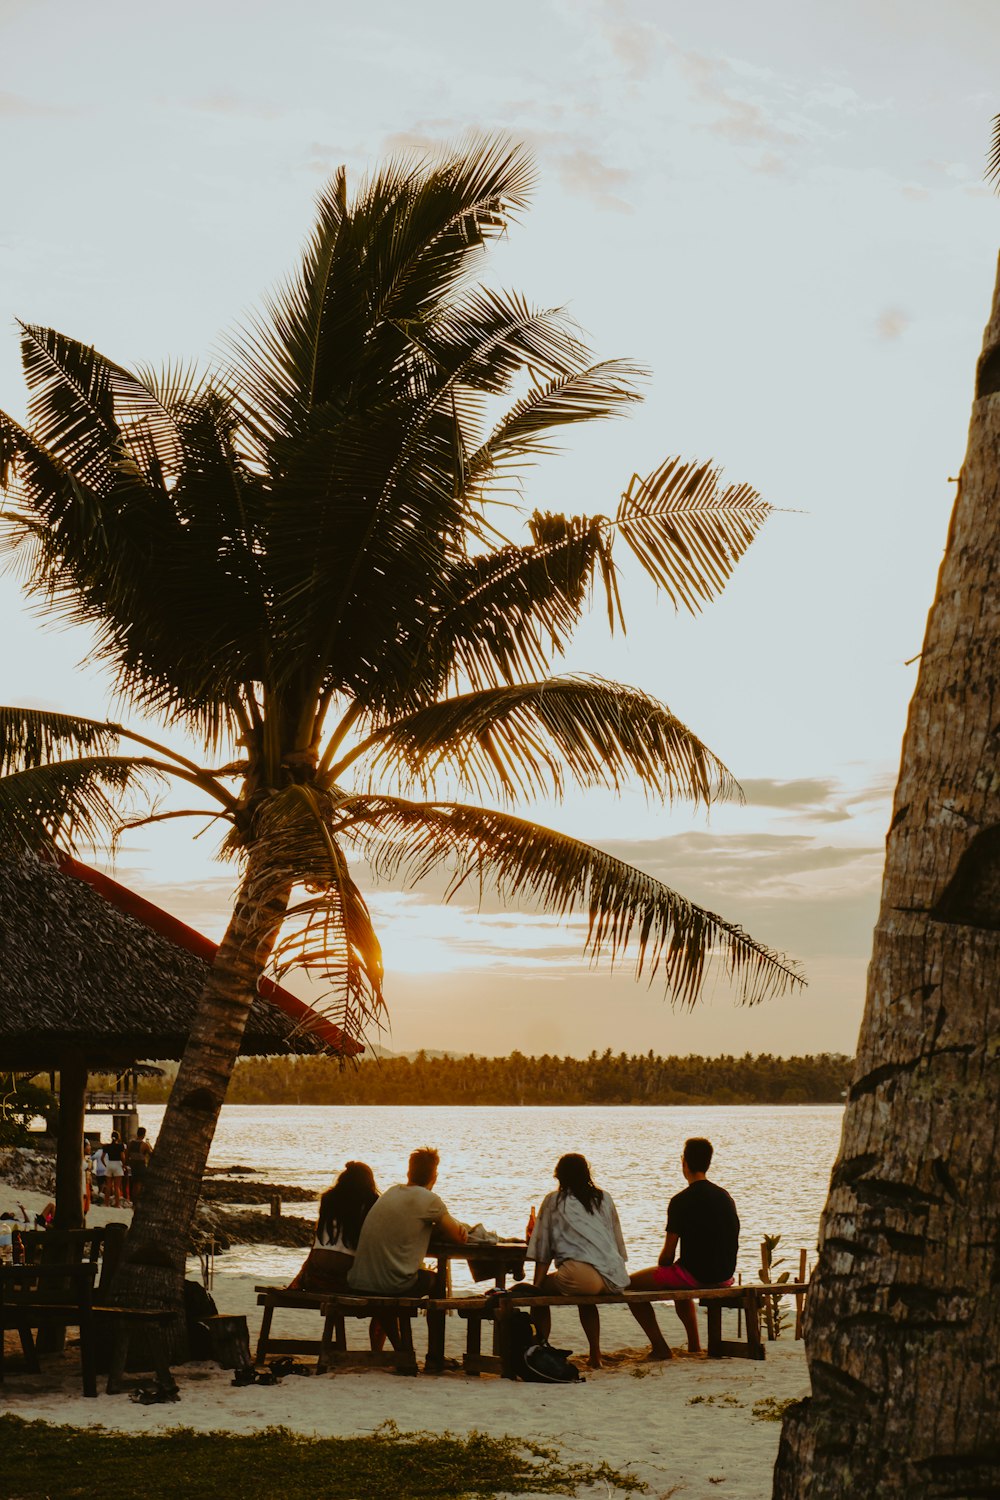 a group of people sitting on a bench under a palm tree